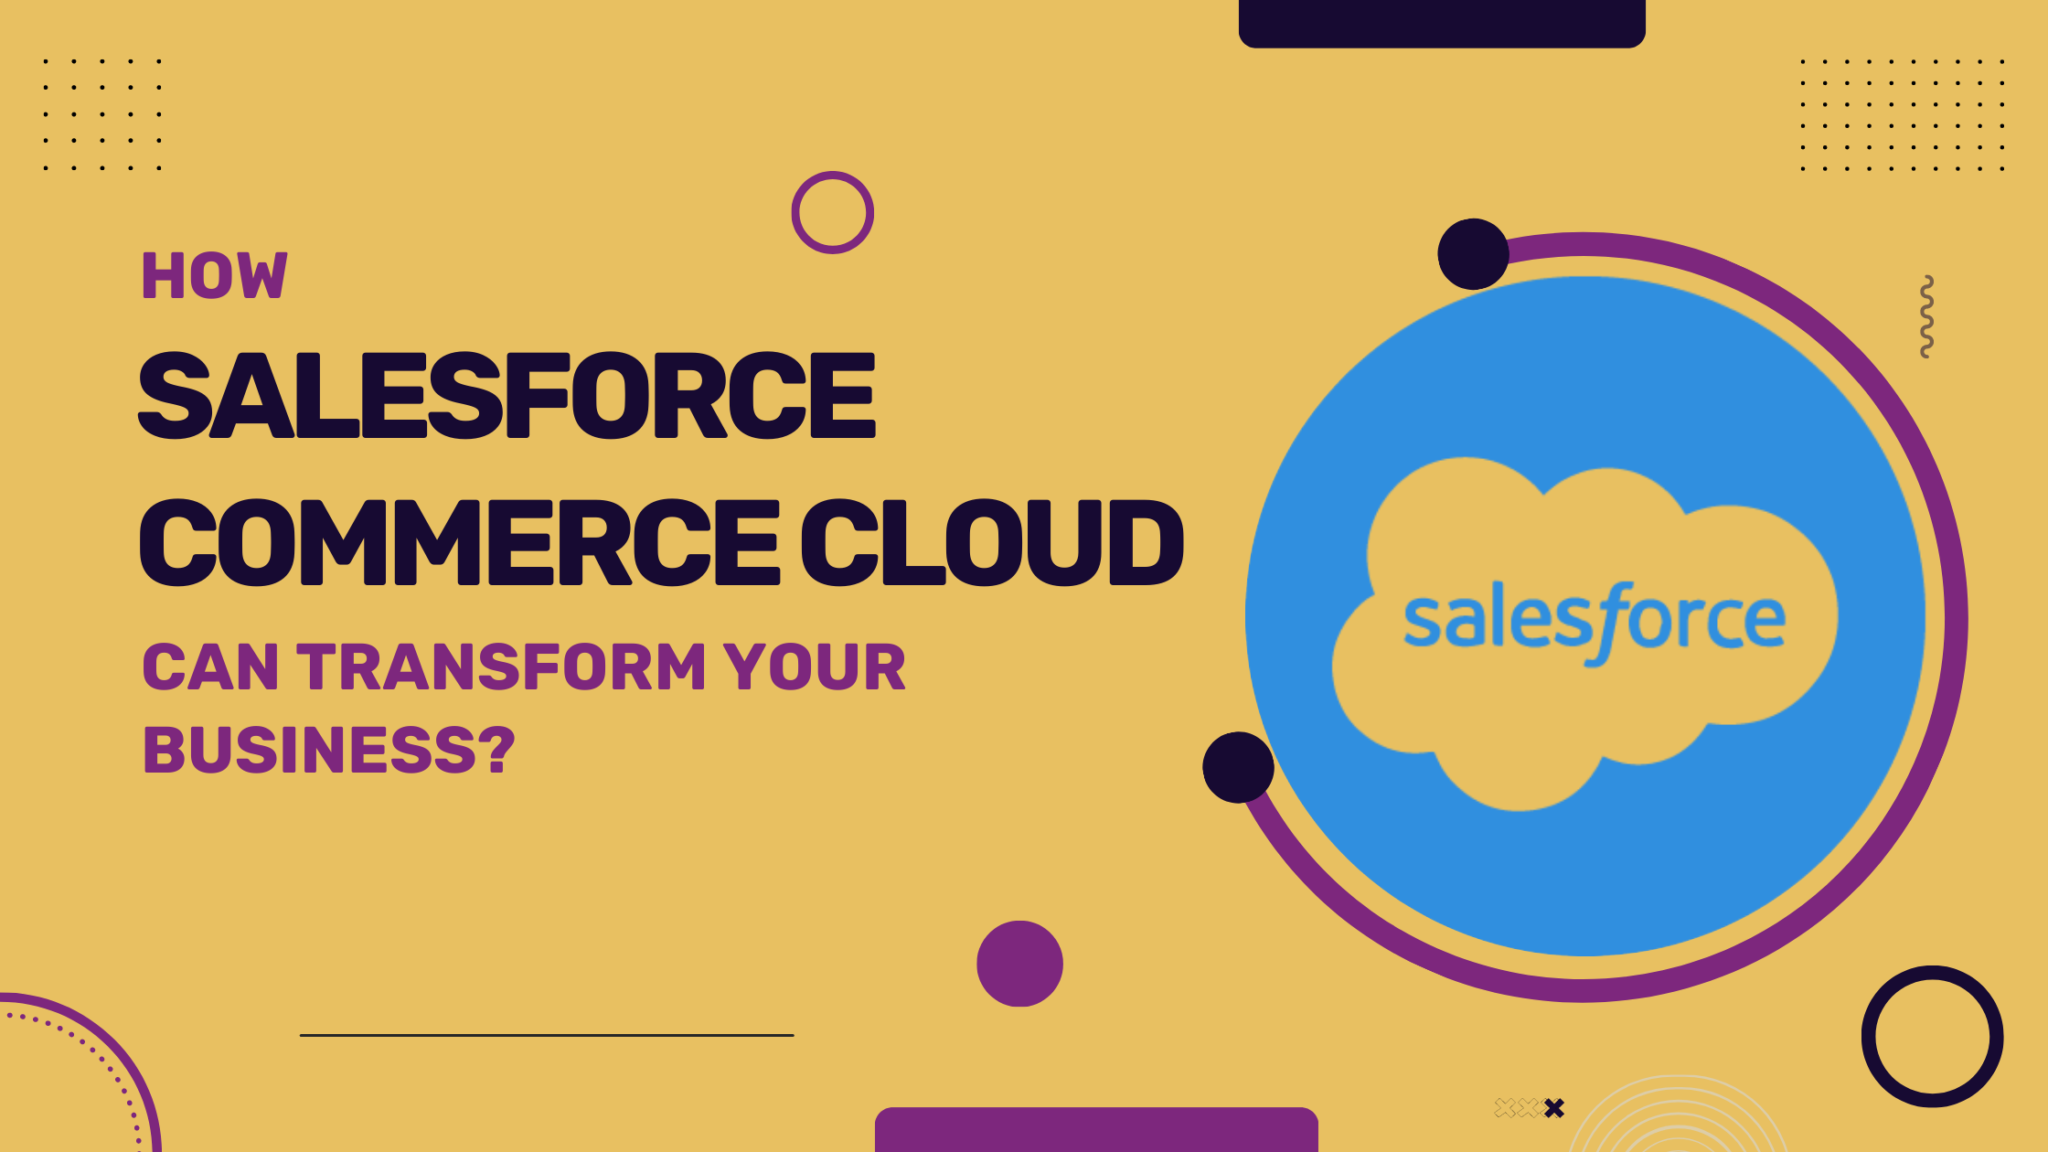 Explore the Business Transformation Potential of Salesforce Commerce Cloud.